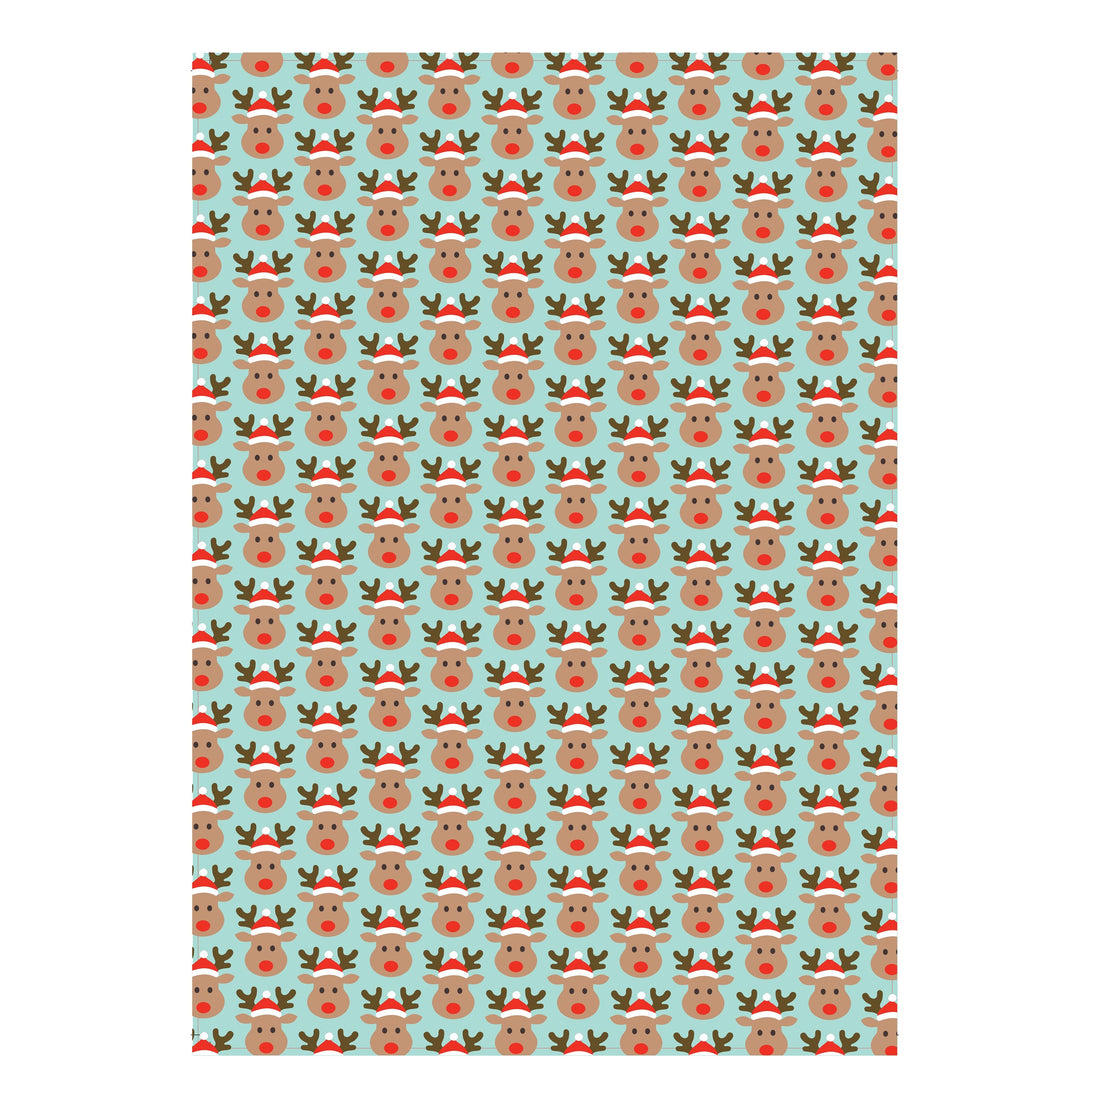 Rudi rudolph wrapping paper